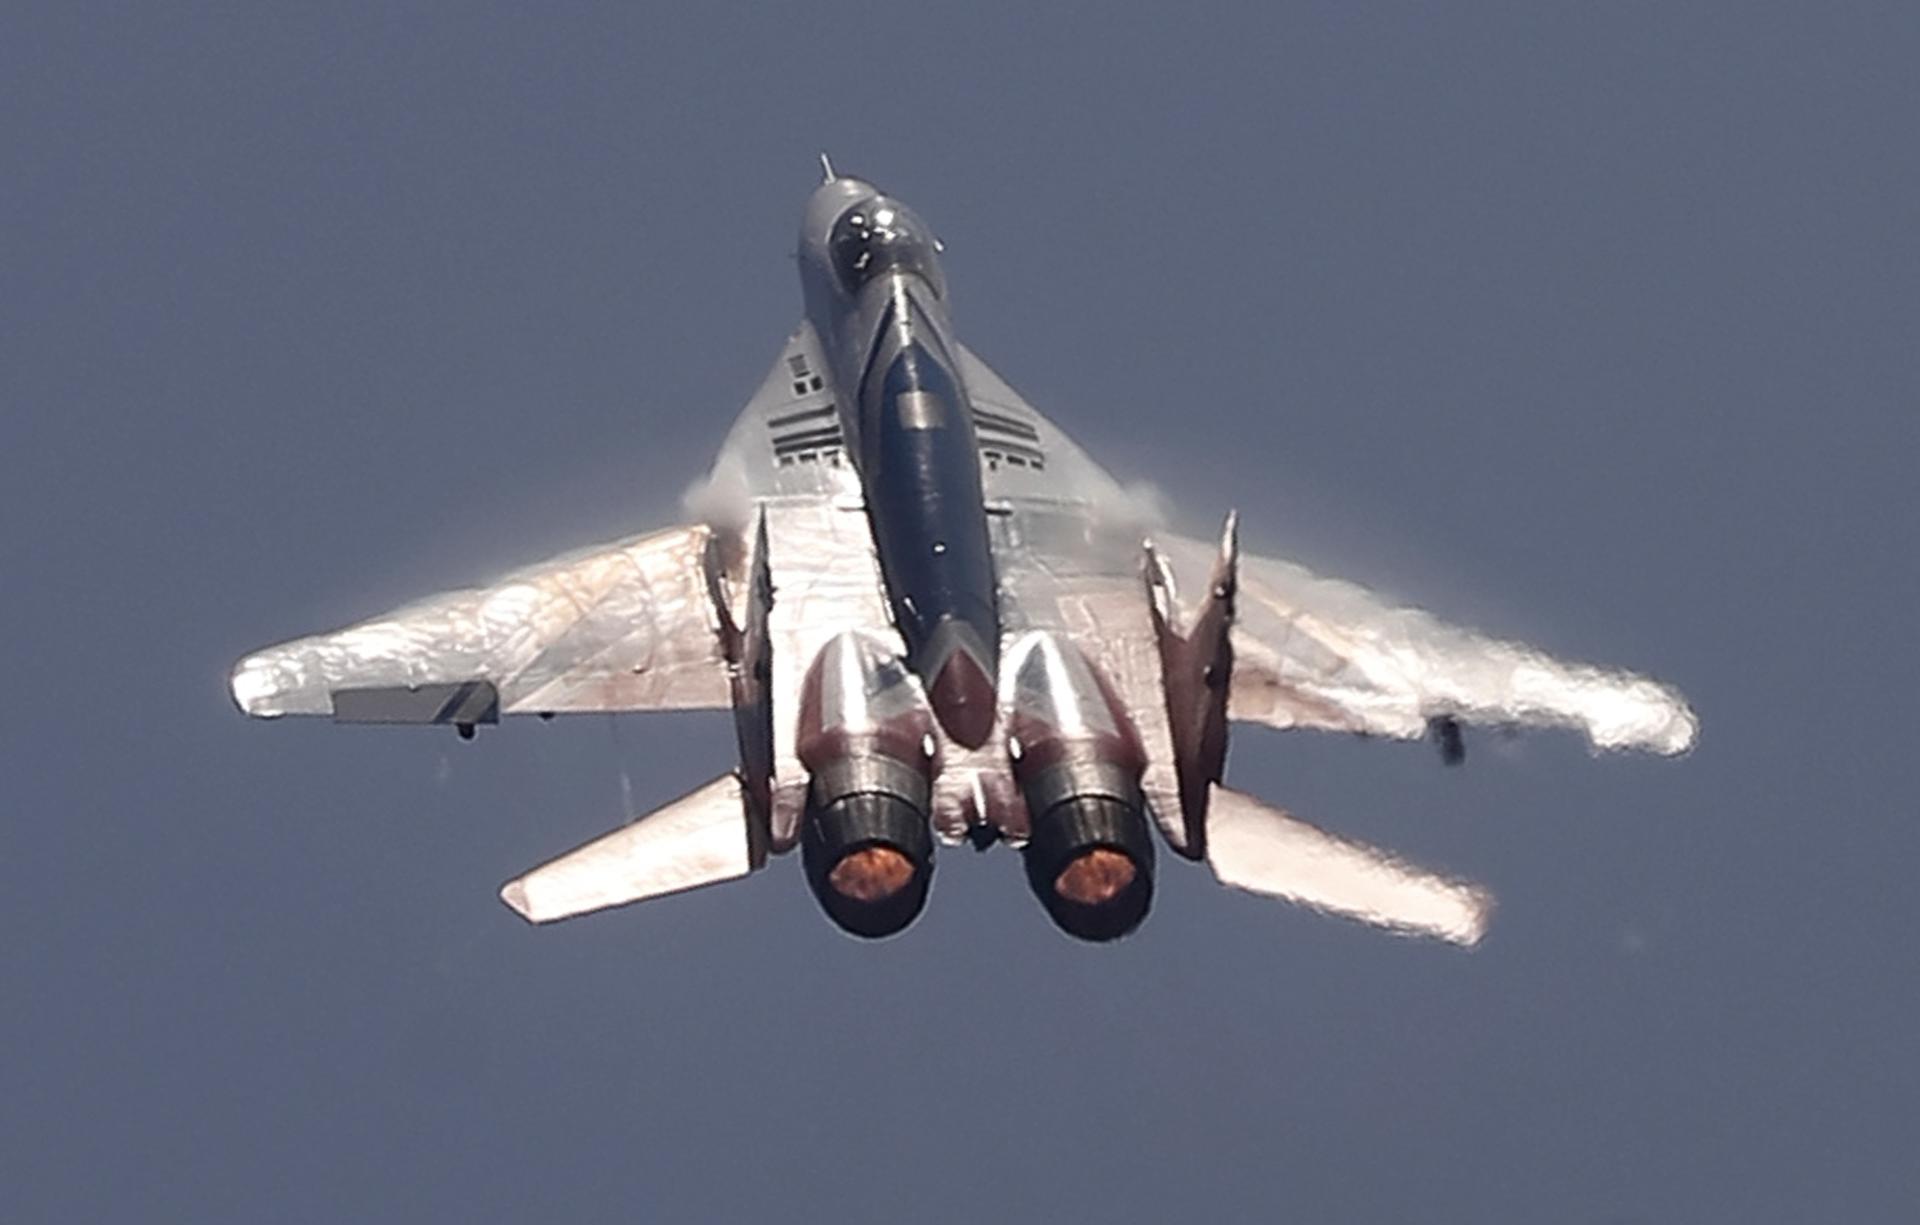 (FILE) A MiG-29 jet fighter of Russian aerobatic team Strizhi (Swifts) performs during the MAKS 2019 International Aviation and Space Salon in Zhukovsky outside Moscow, Russia, 31 August 2019. EFE/EPA/MAXIM SHIPENKOV
